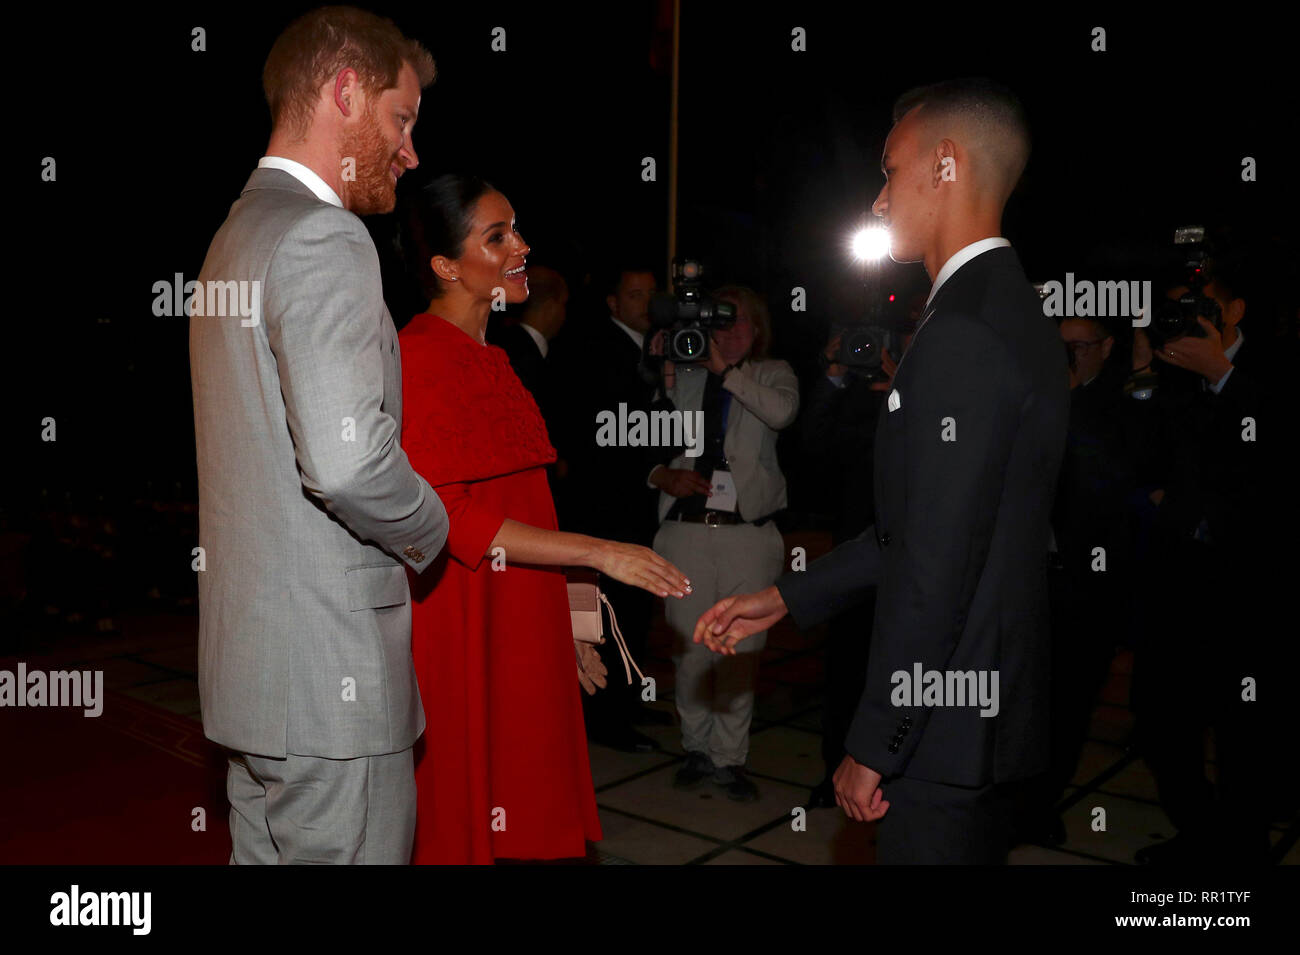 The Duke and Duchess of Sussex meet Crown Prince Moulay Hassan at a Royal Residence in Rabat as they start their tour of Morocco. Stock Photo